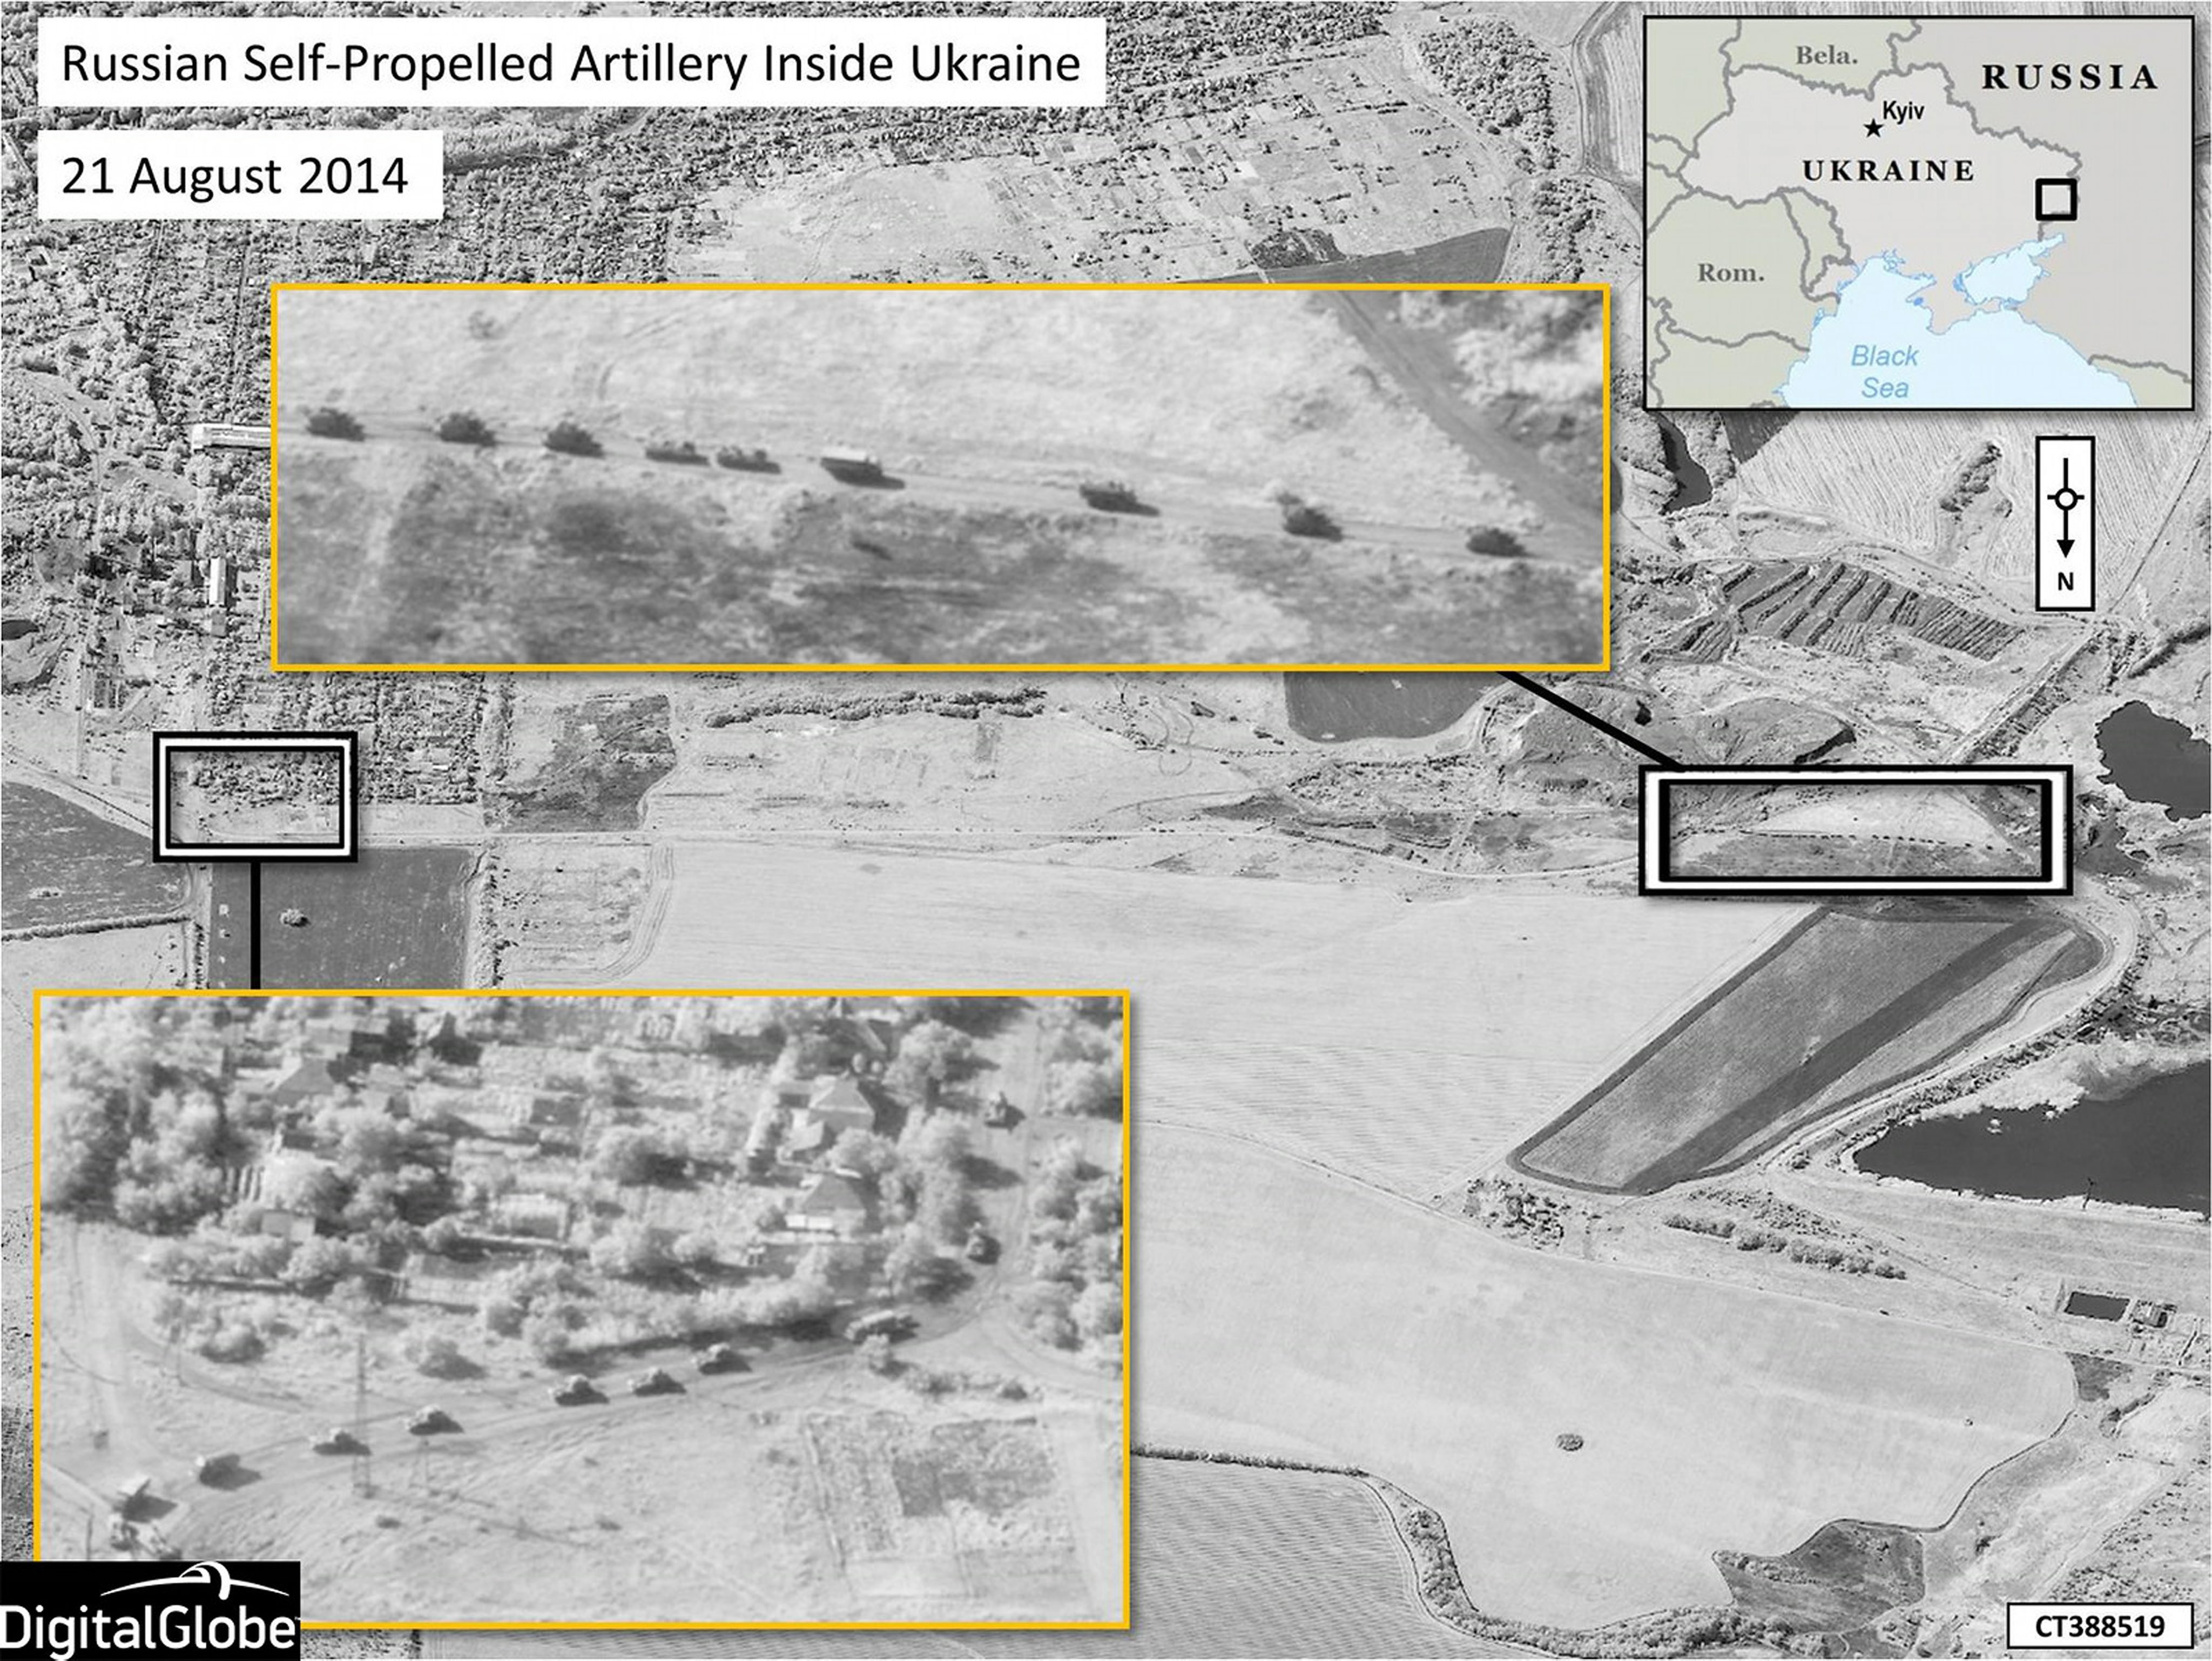 NATO releases satellite imagery that they say shows Russian combat troops inside Ukraine